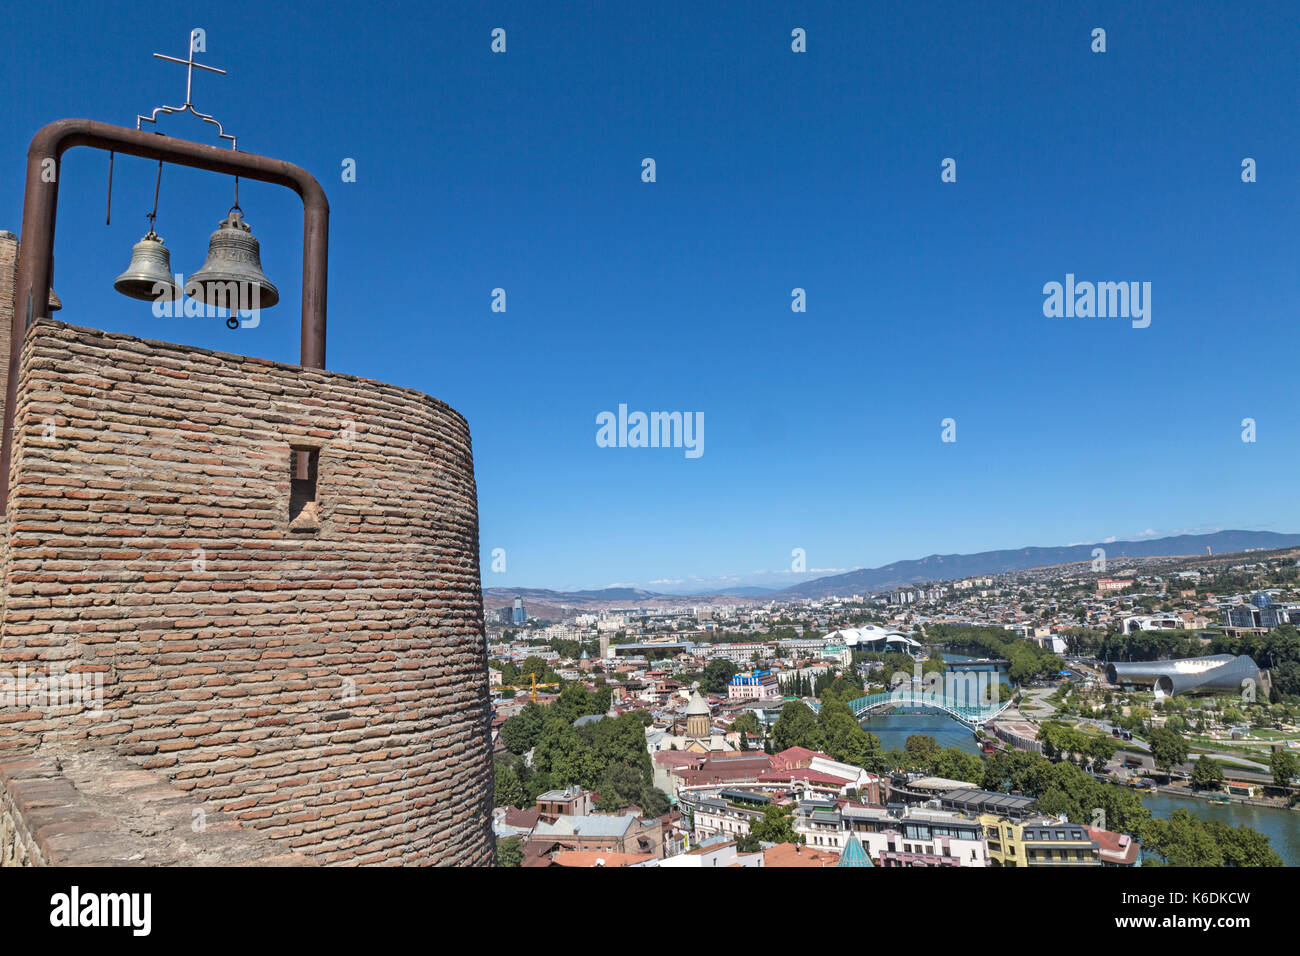 Views across the city of Tbilisi in Georgia, showing architecture and buildings. Stock Photo